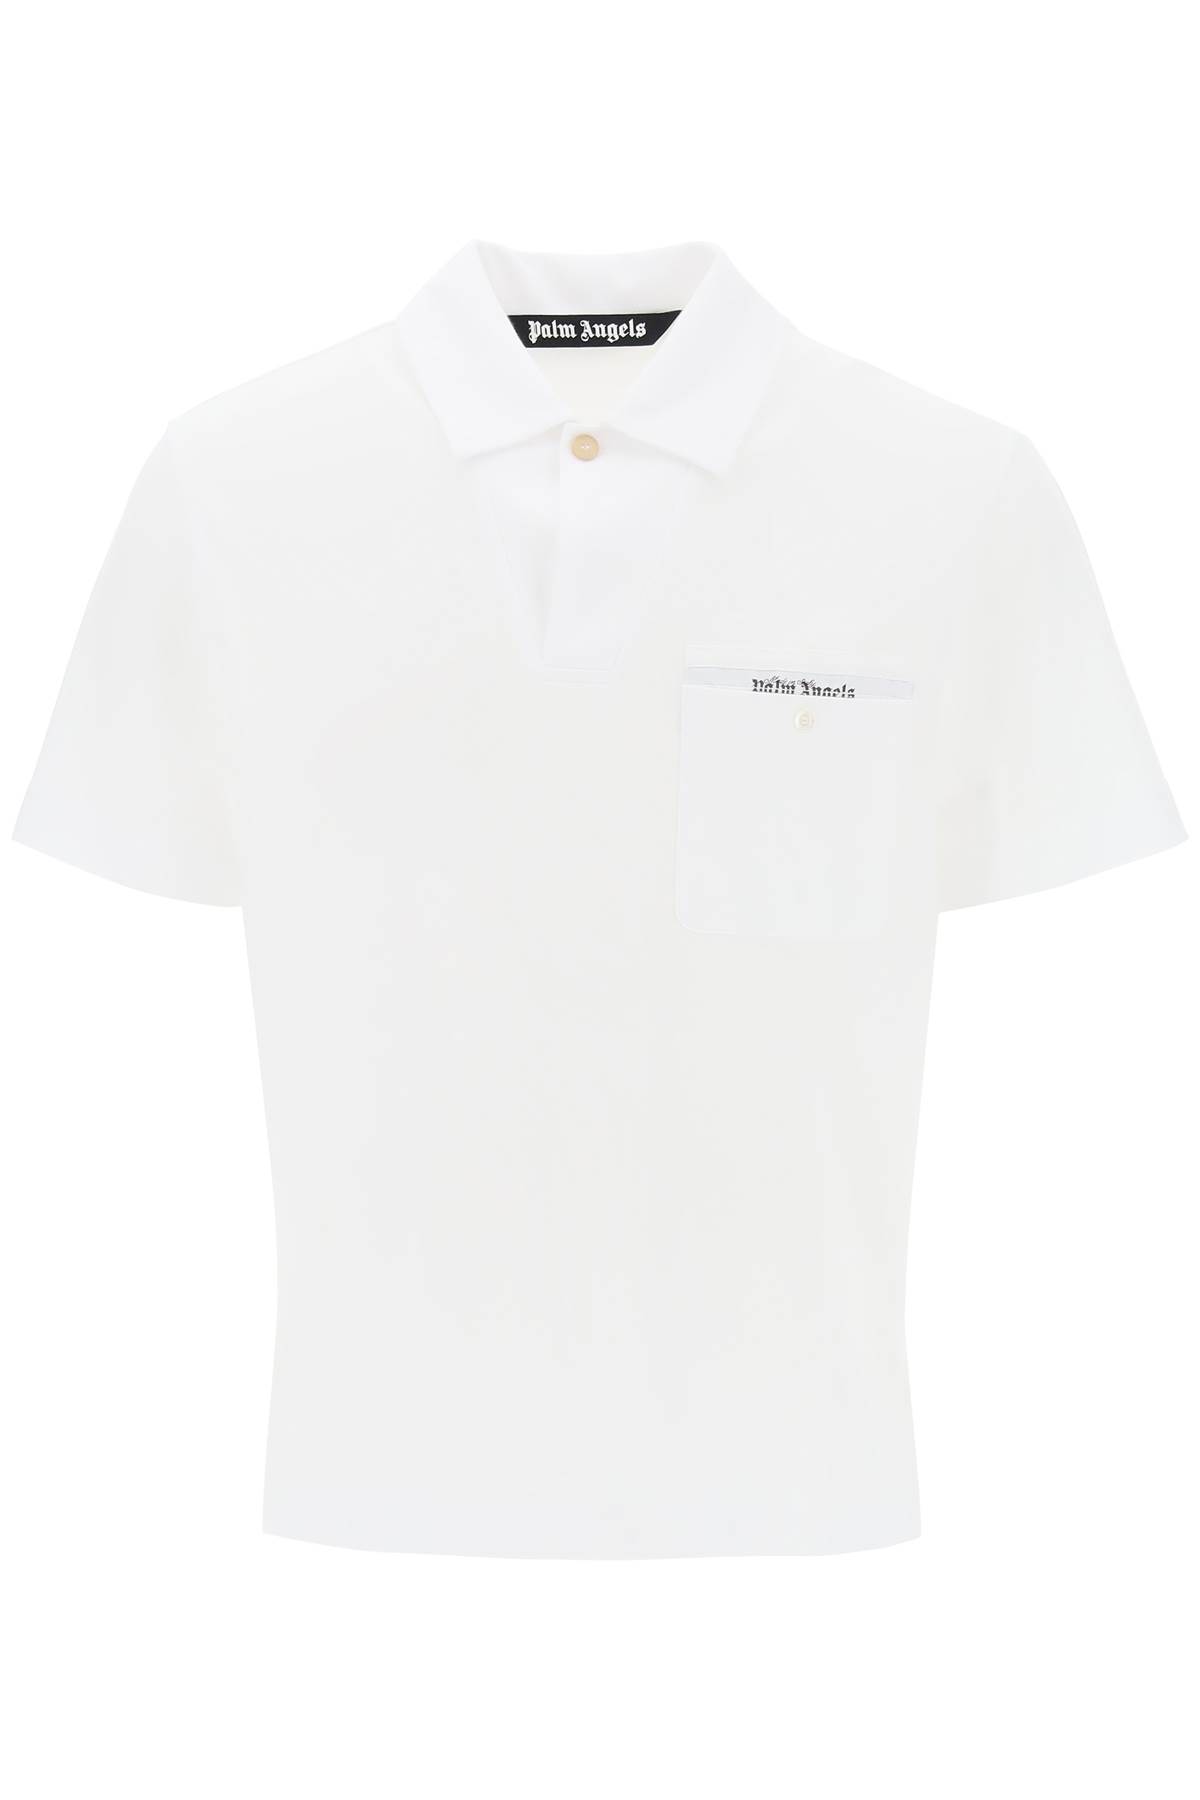 Palm Angels Satorial Tape Button Polo Shirt